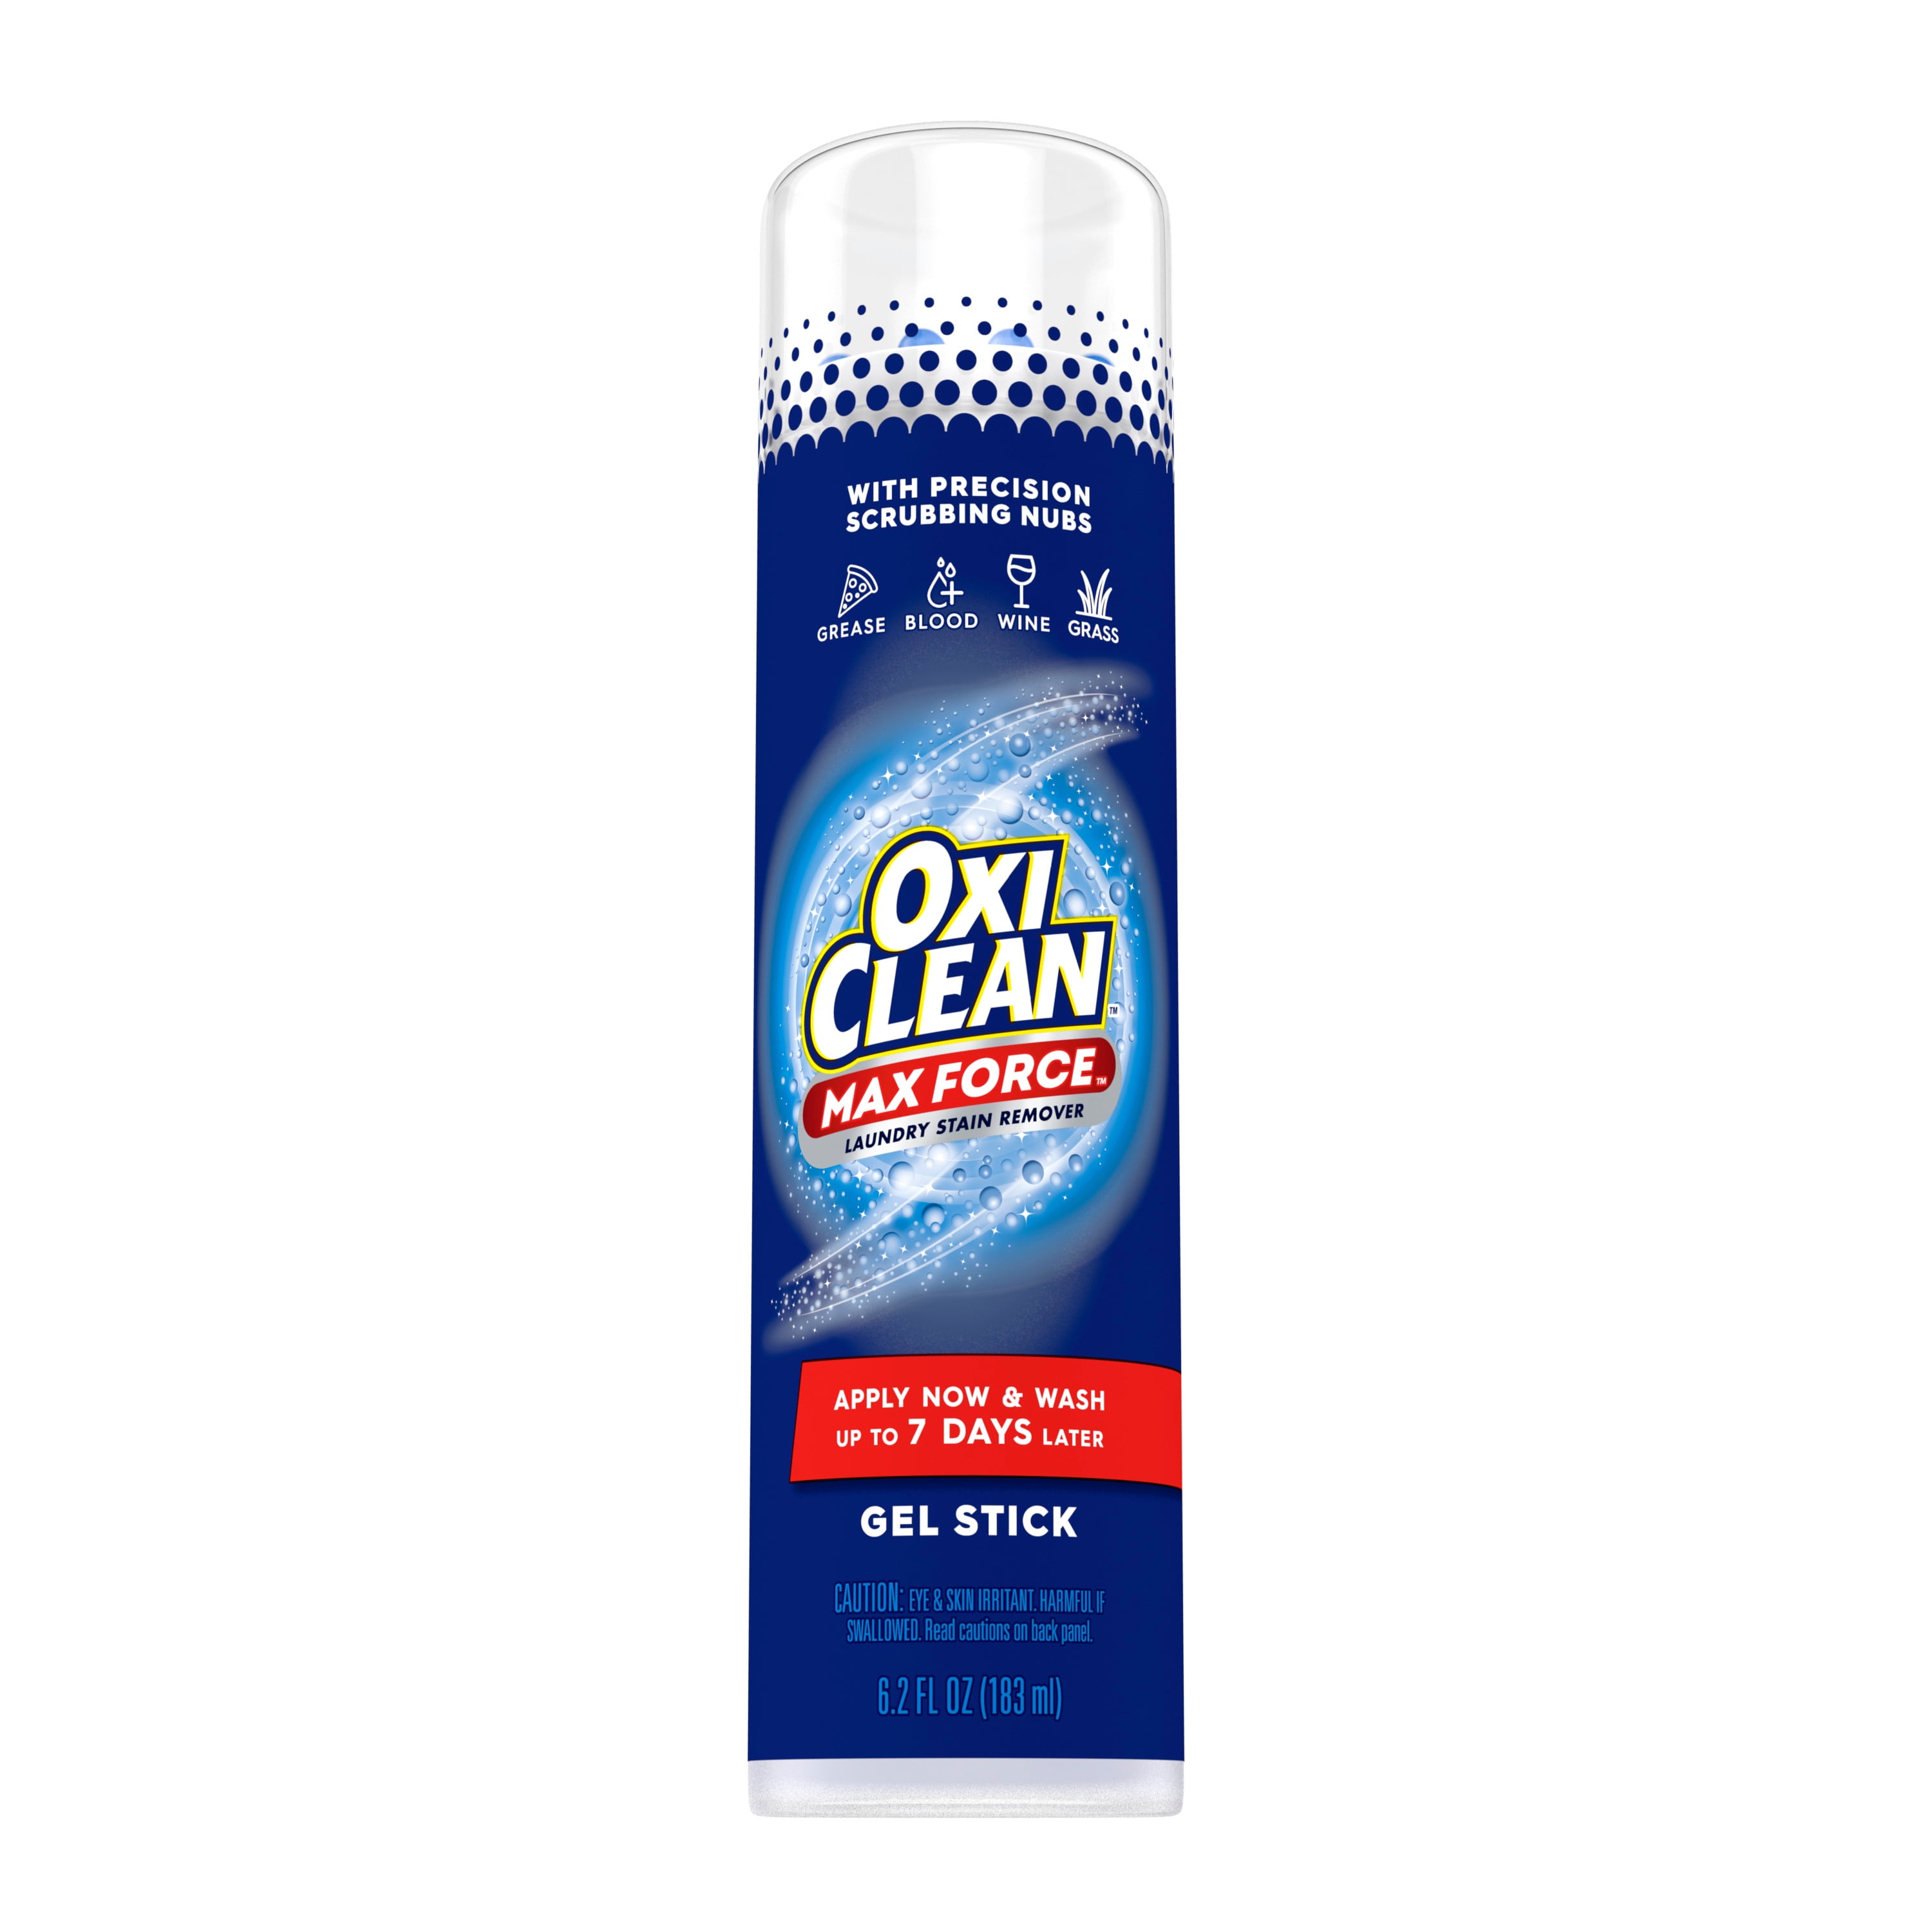 OxiClean Max Force Laundry Stain Remover Gel Stick 6 2 fl oz 484bd364 5aee 443e 8a76 d4d05394522c.c9a597cb78e06e14f14313aa8c3078d1